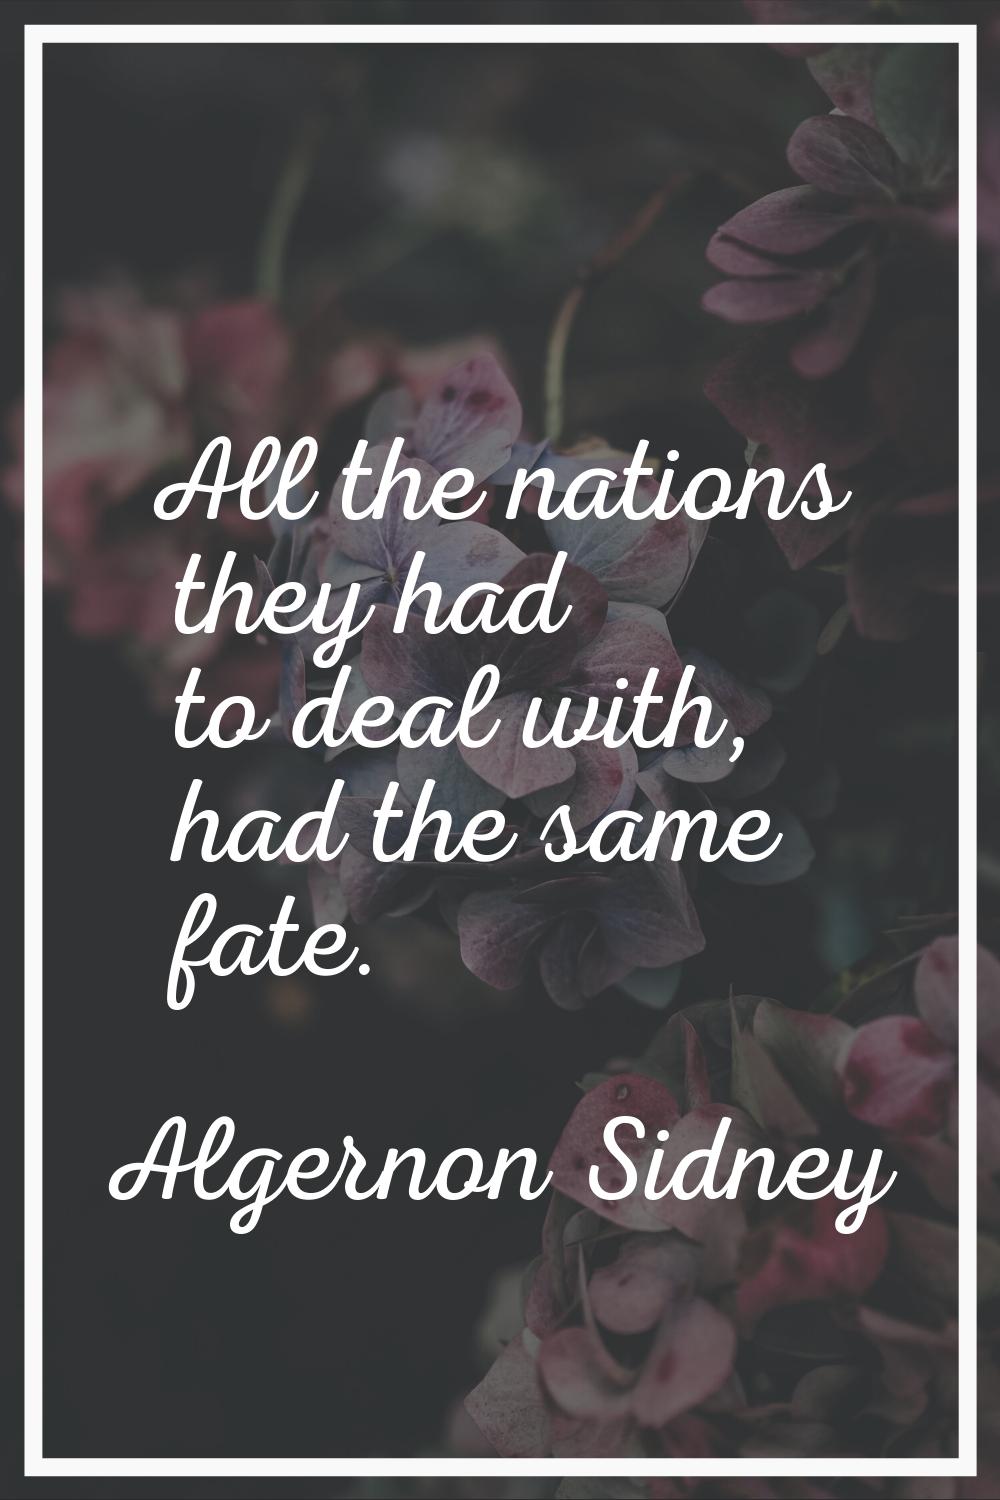 All the nations they had to deal with, had the same fate.